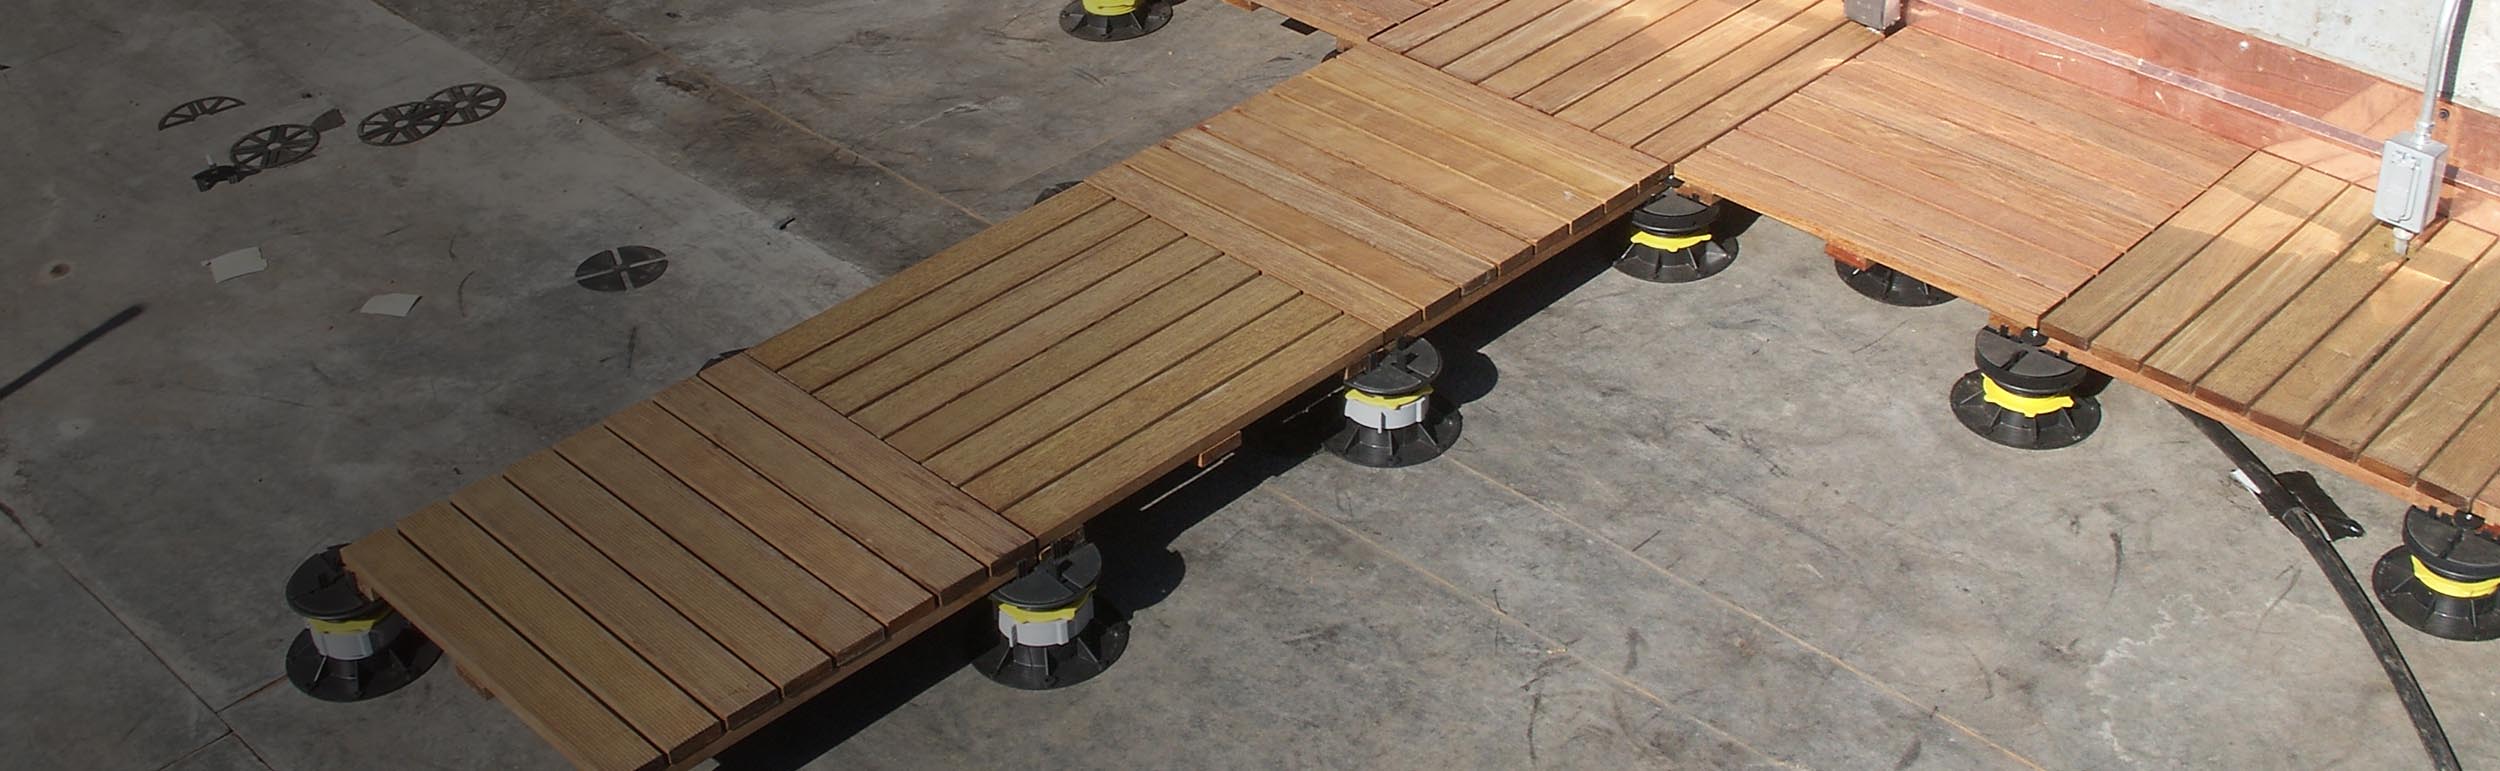 adjustable deck supports